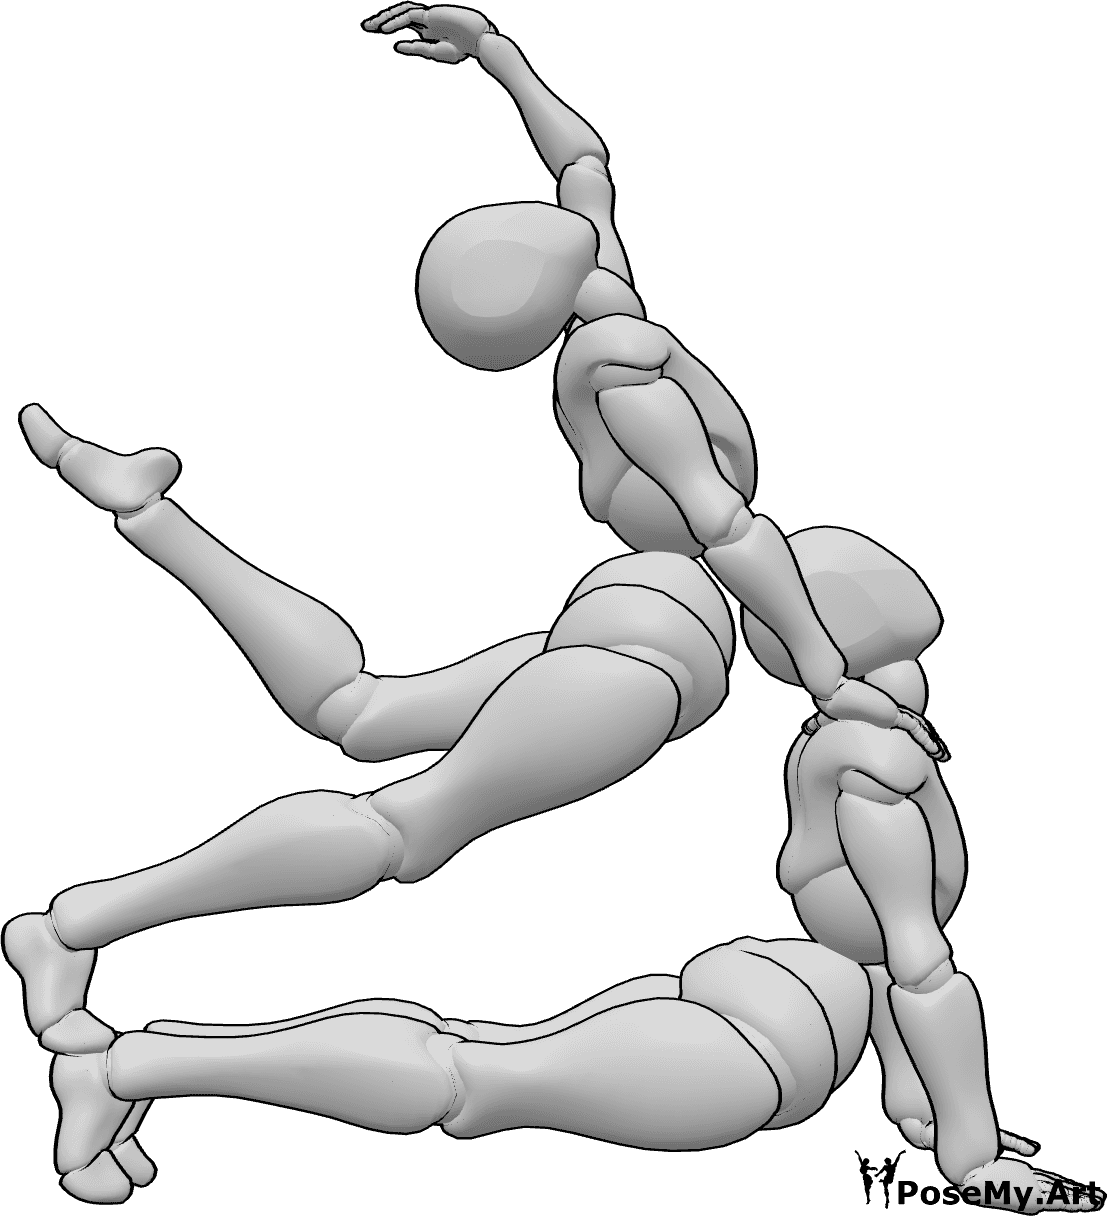 Pose Reference - Two acrobatic females pose - Two acrobtic females are performing an acrobatic pose together